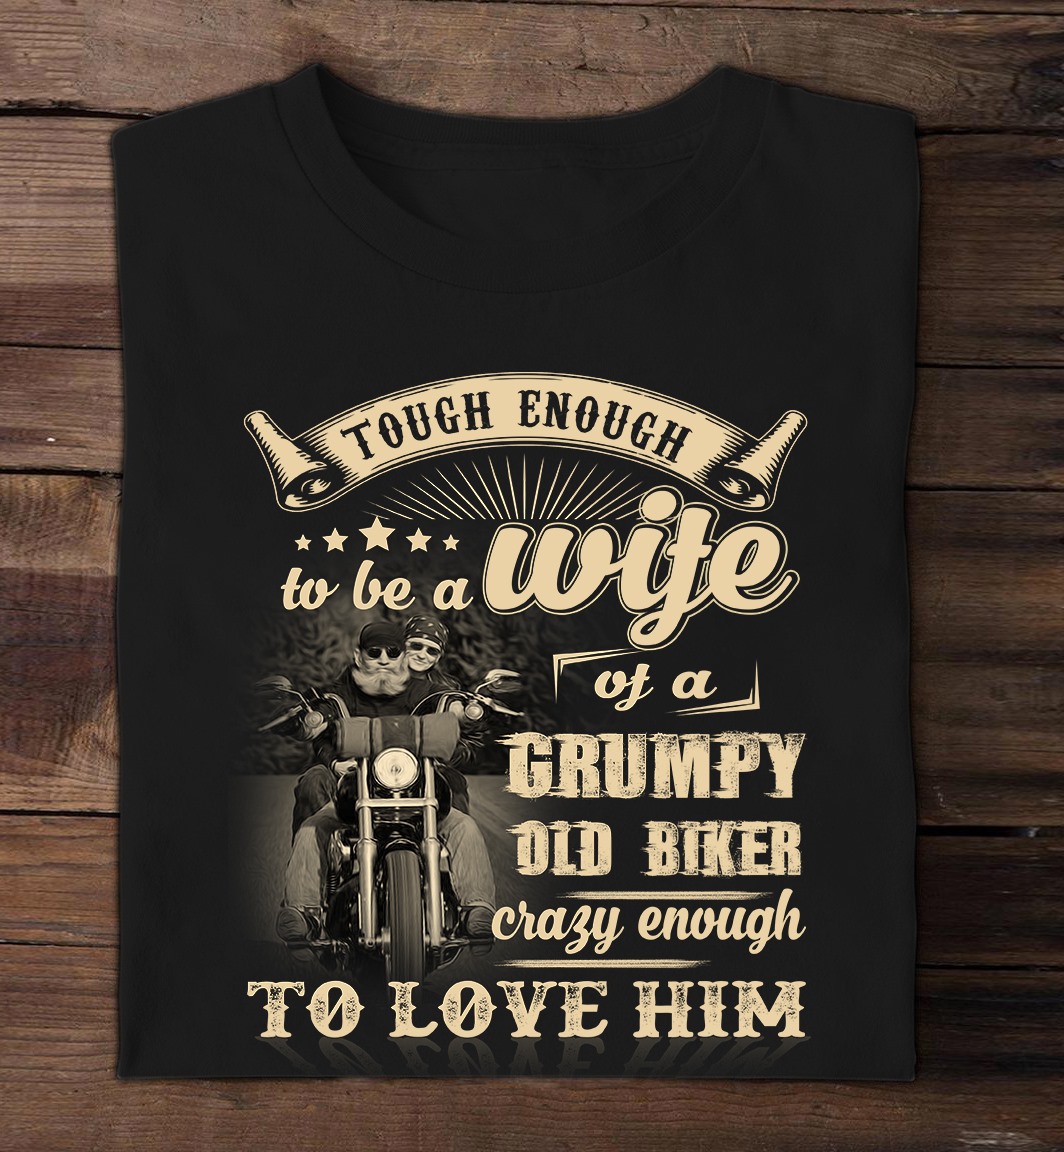 Touch enough to be a wife of a grumpy old biker crazy enough to love him